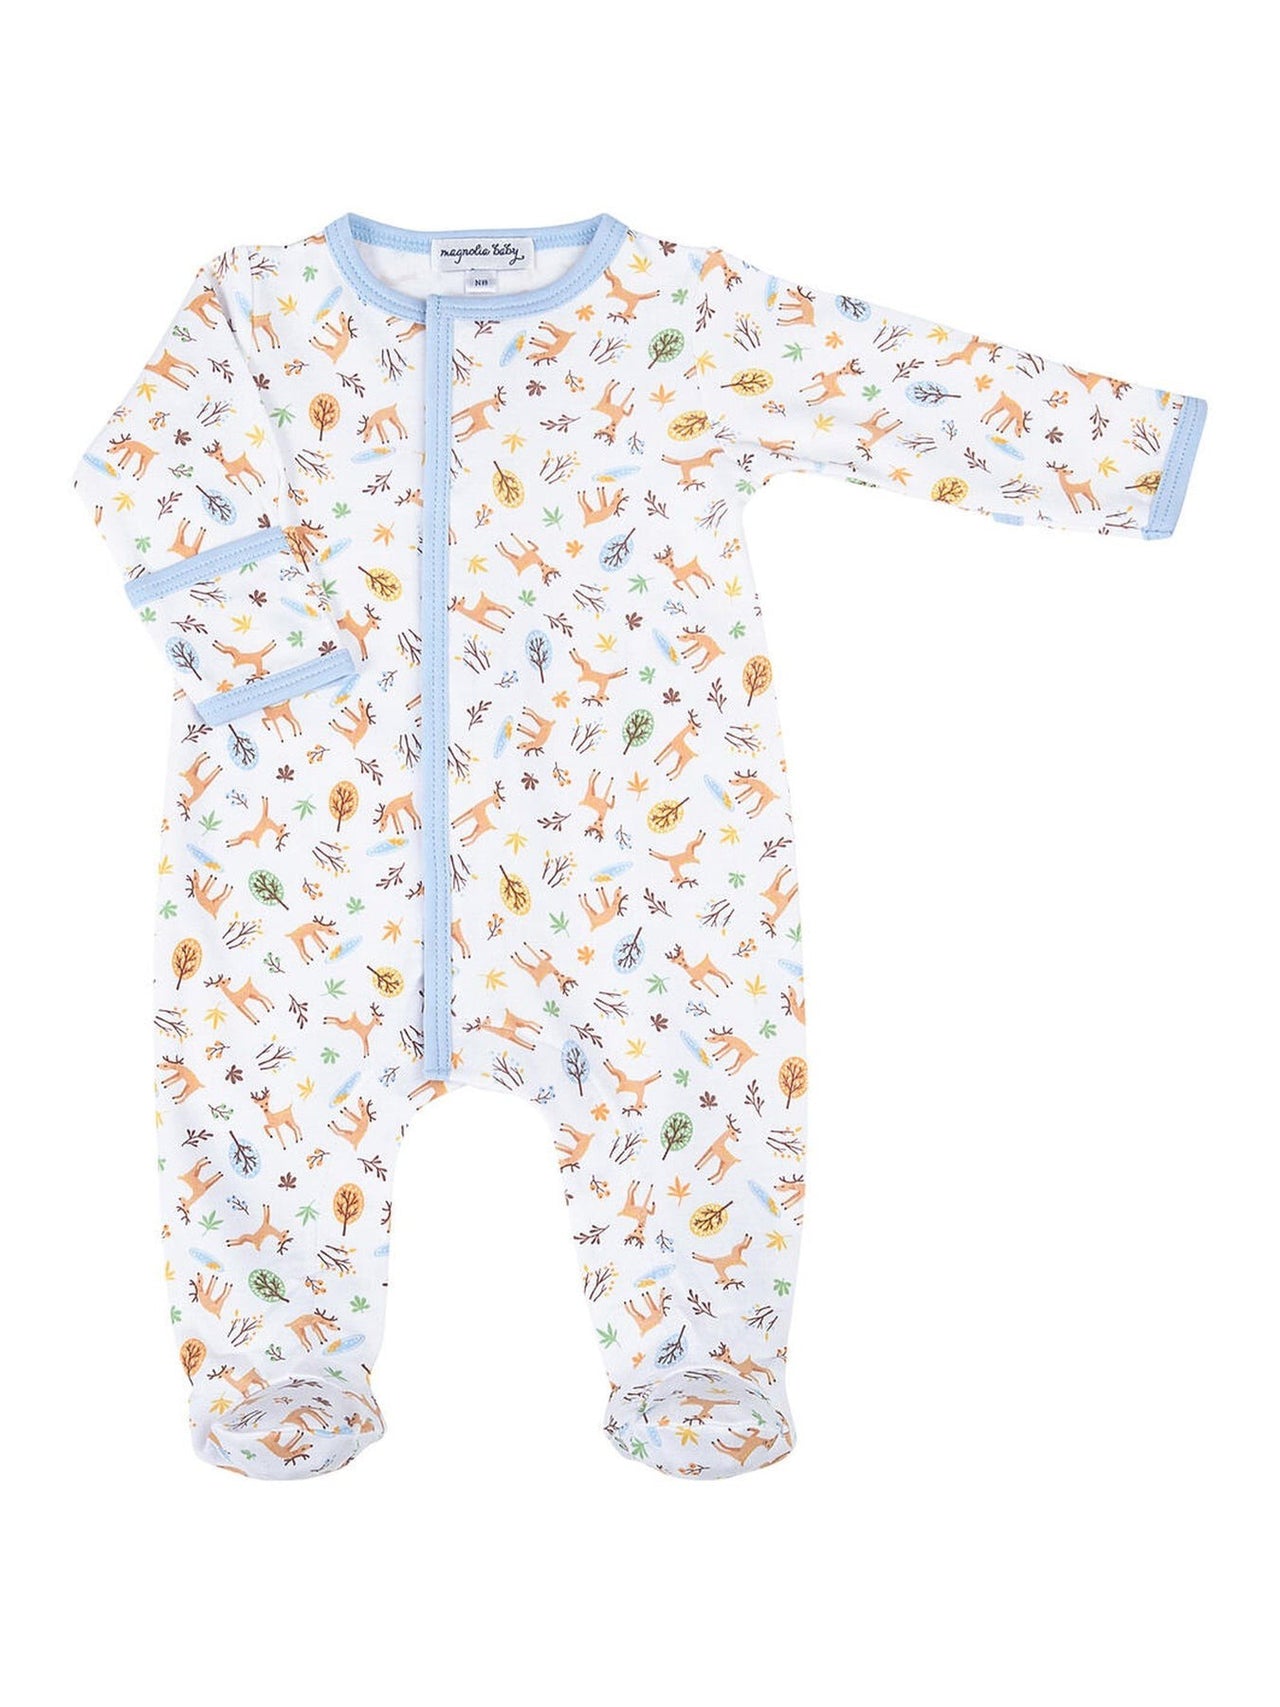 Magnolia Baby Into The Forest Printed Footie LB5313-402P5105